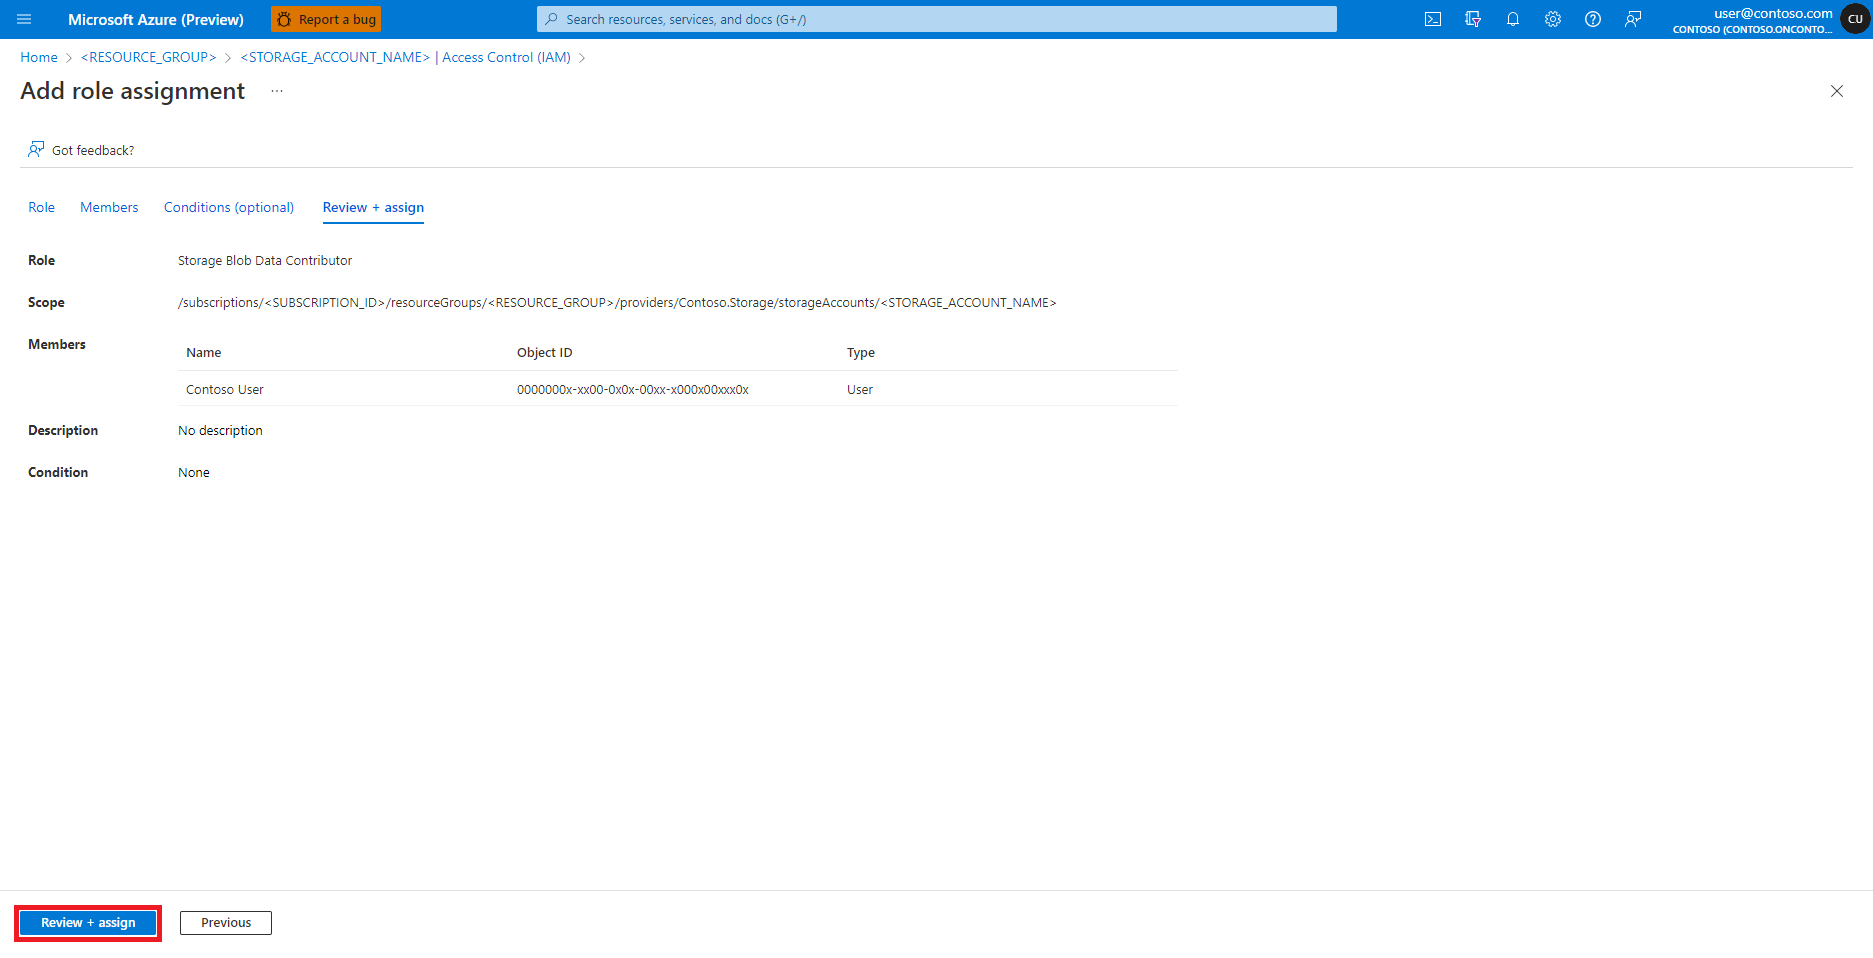 Screenshot showing the Azure add role assignment screen review and assign tab.